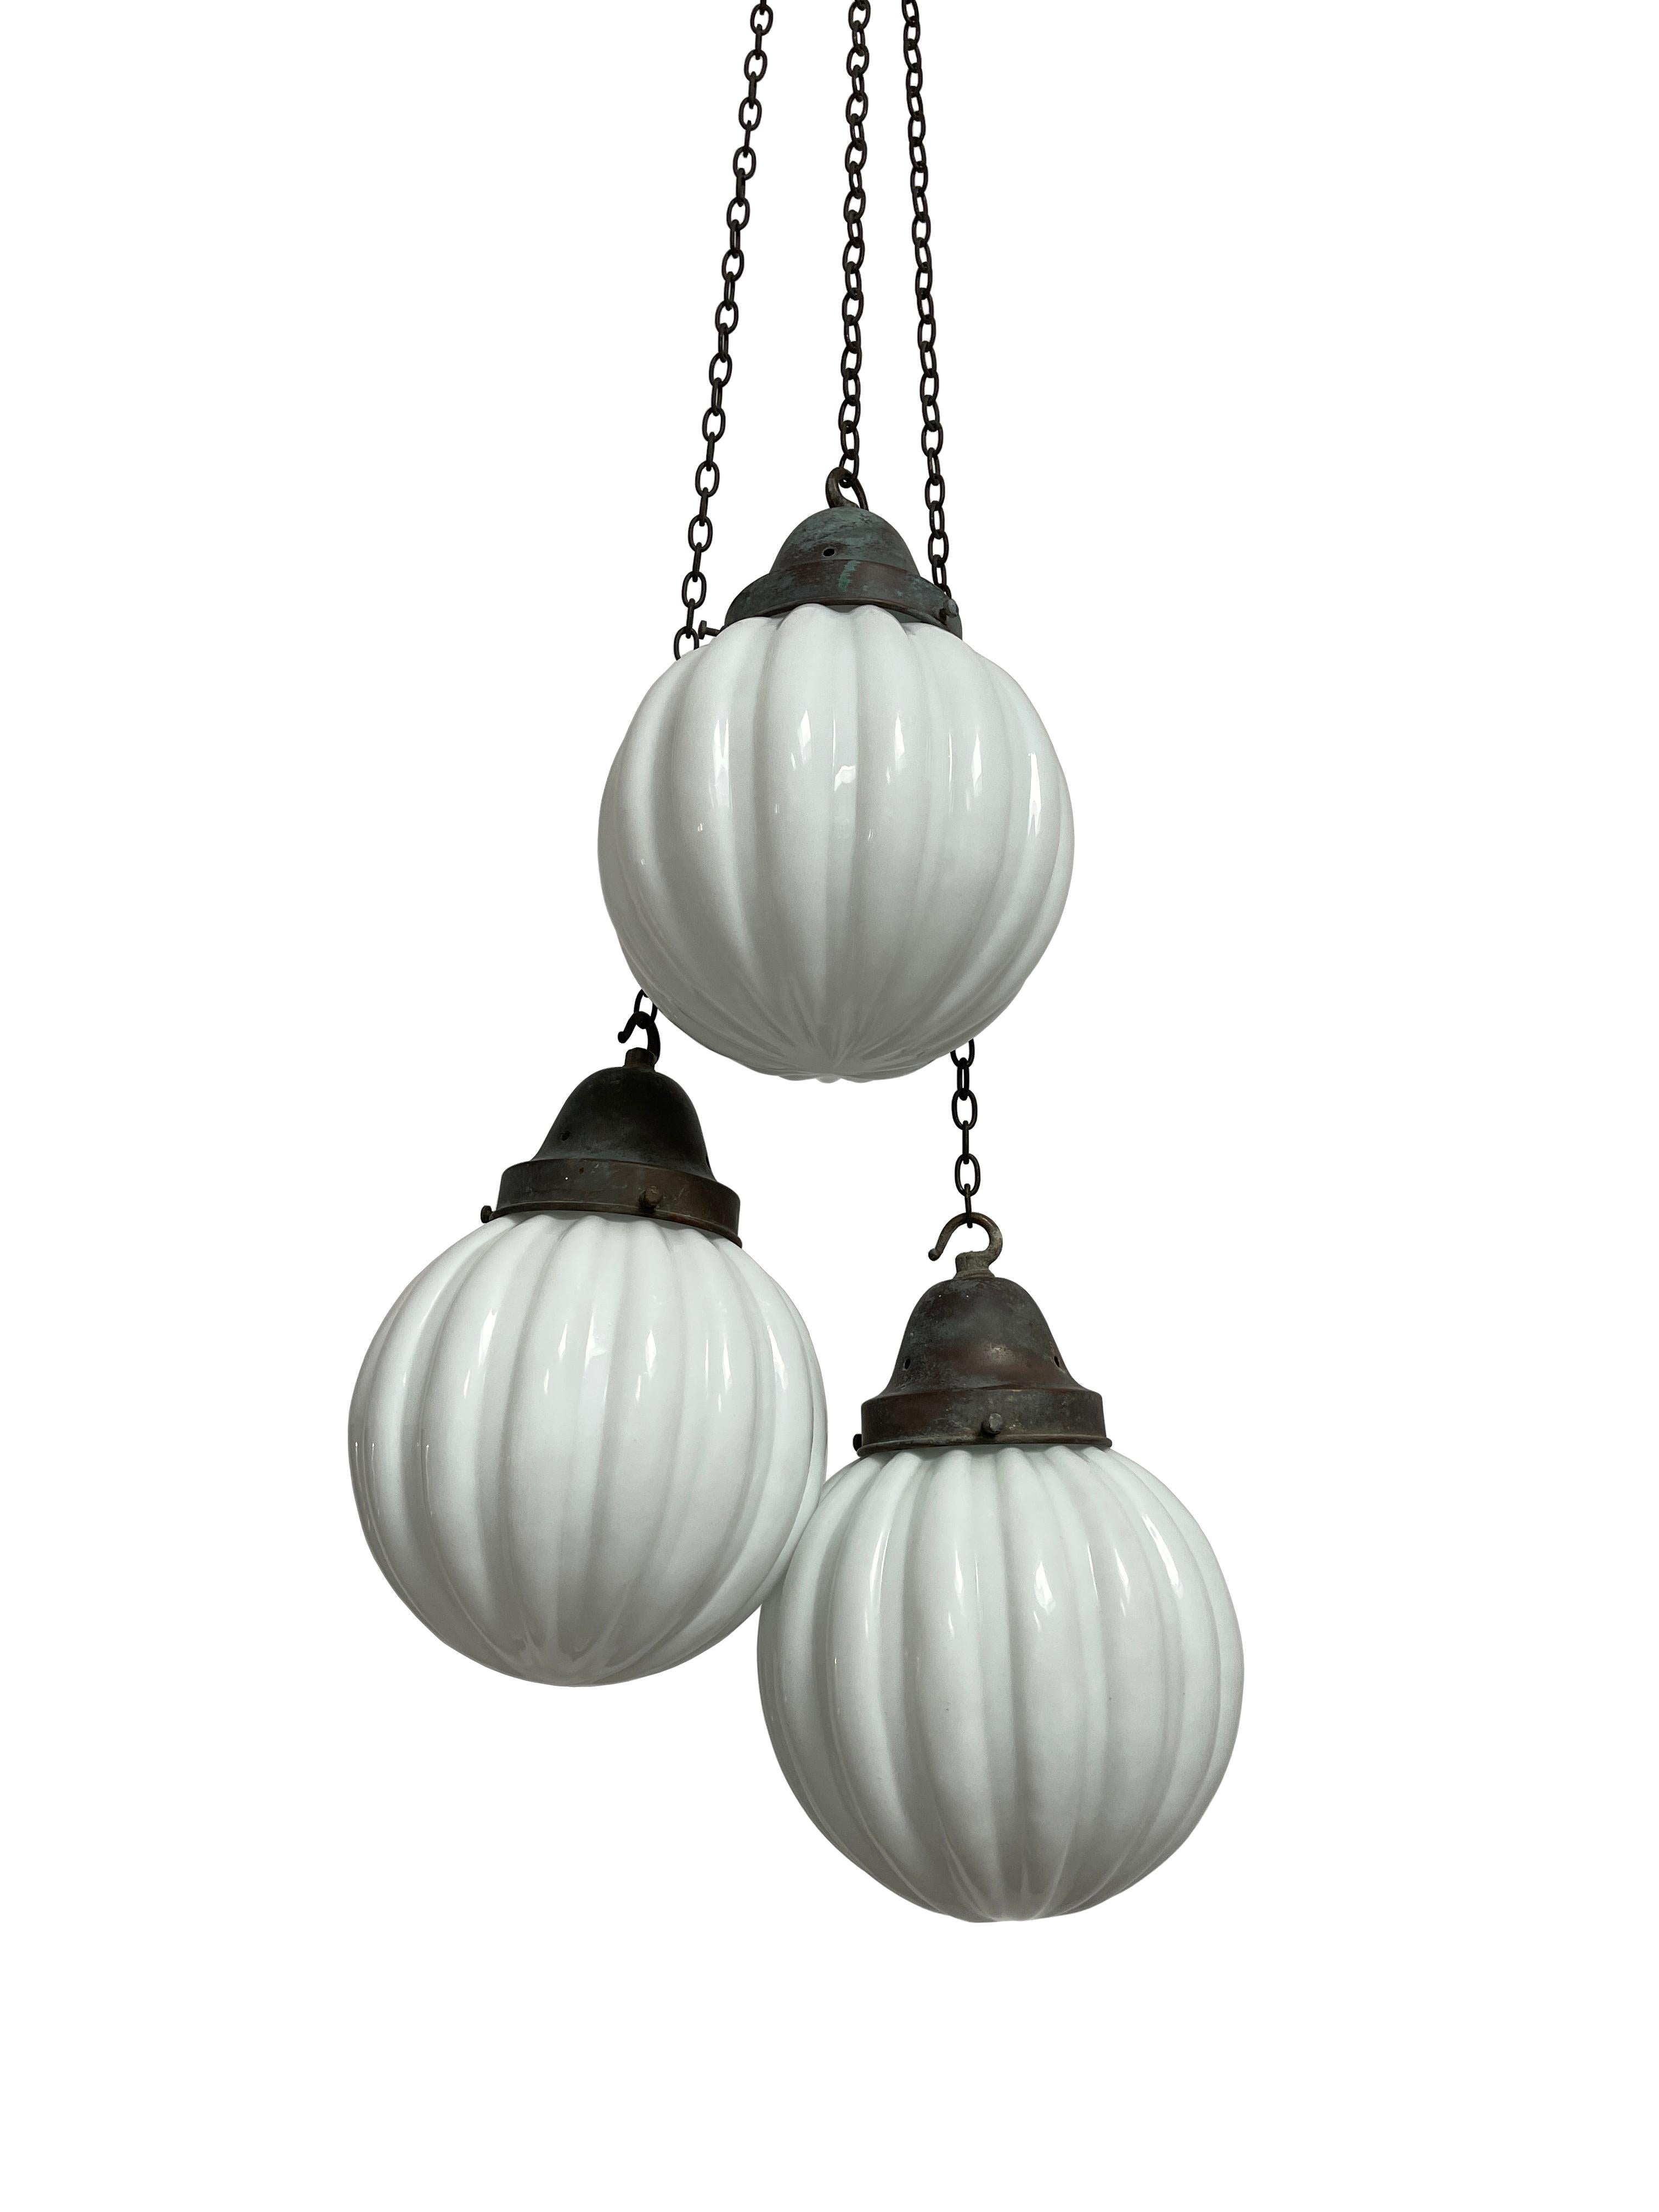 Run Collection Antique Vintage Opaline Milk Glass Globe Ceiling Pendant Lights In Good Condition In Sale, GB